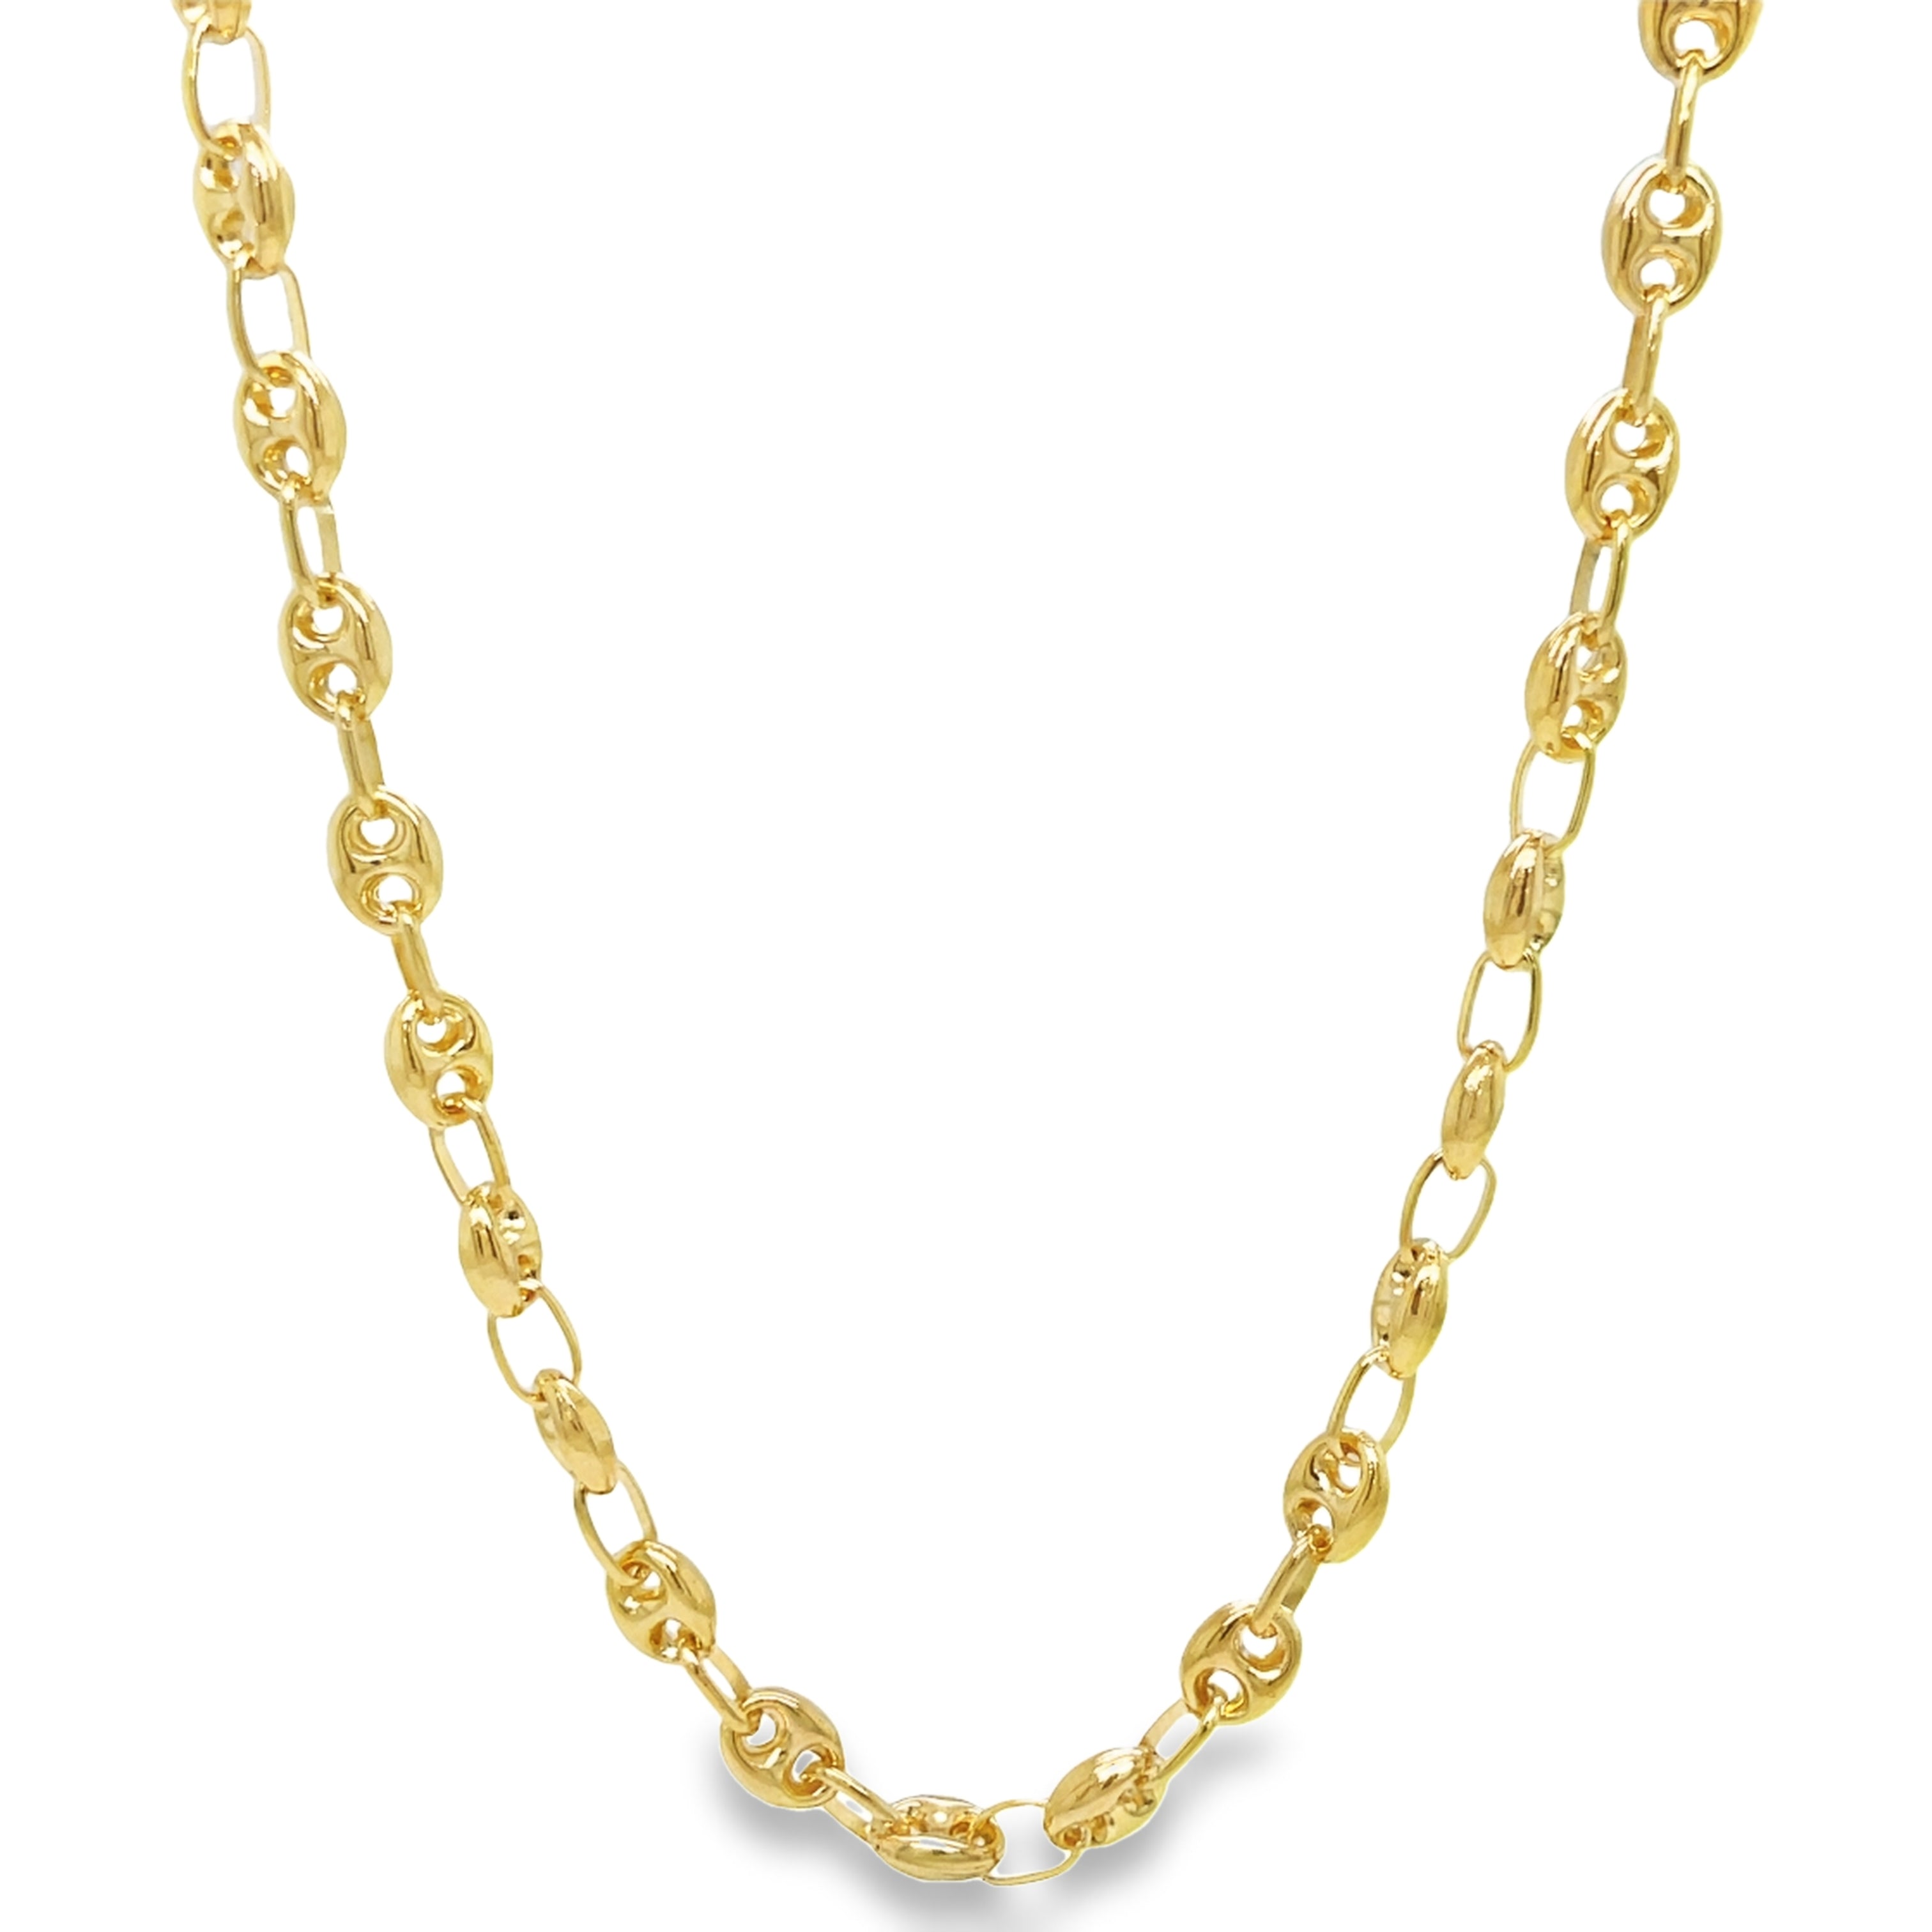 This classic 14K yellow gold mariner link necklace measures 20" in length and 5.00 mm in thickness. It also features a lobster catch for secure fastening. It ensures a timeless and long-lasting look.   